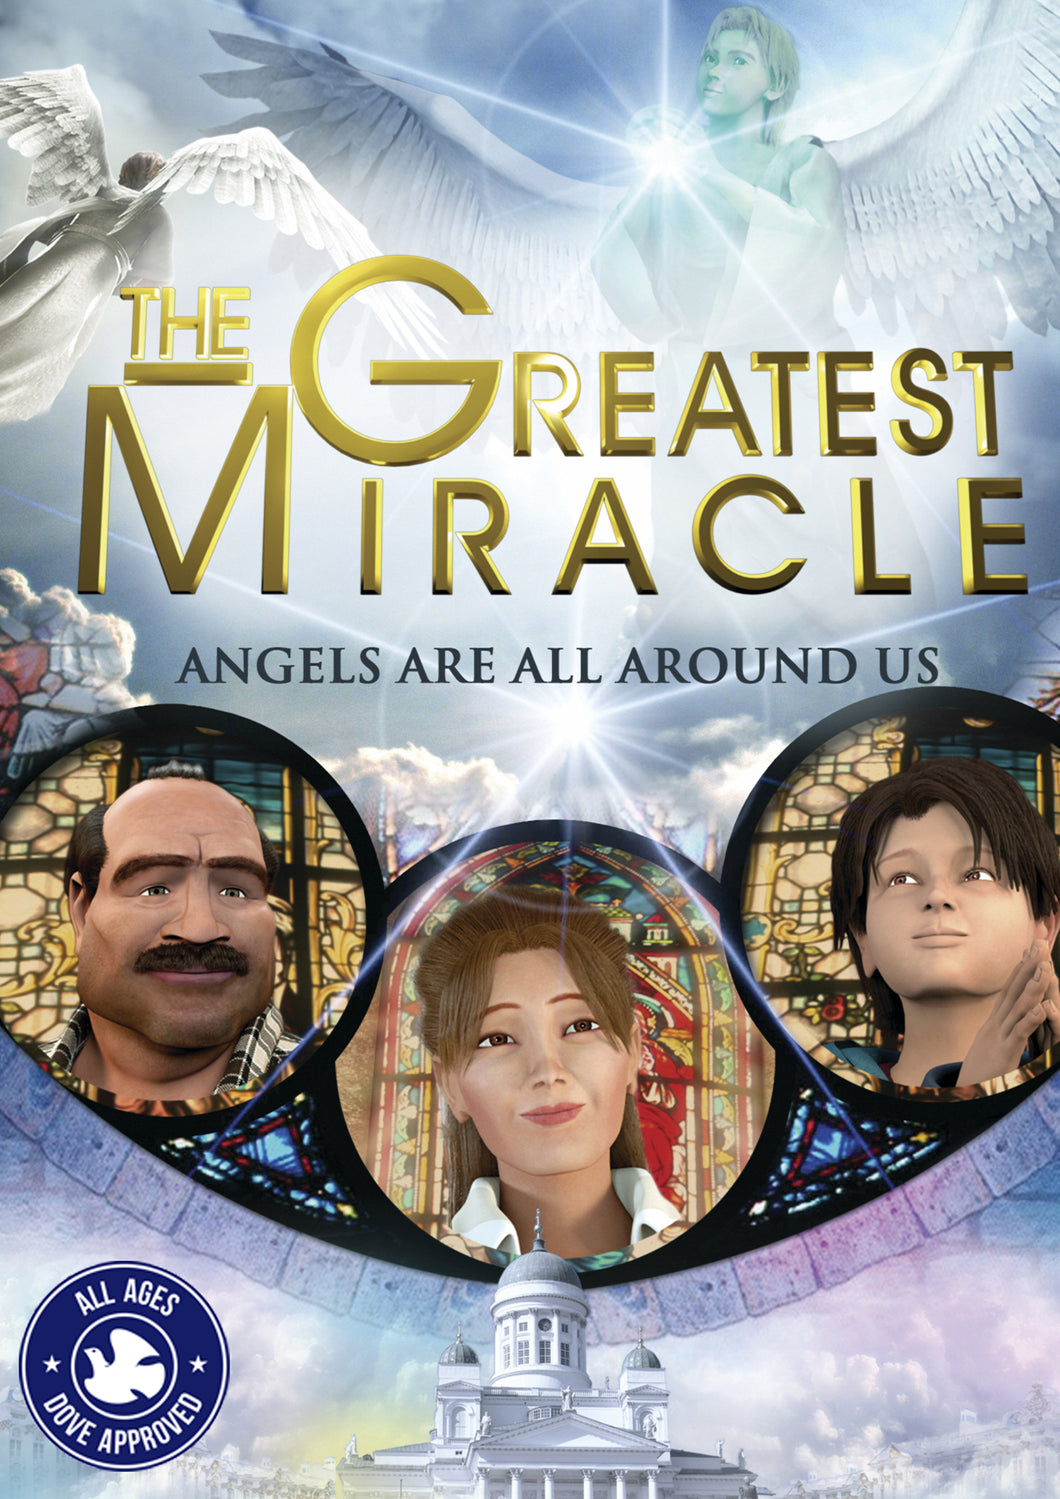 The Greatest Miracle (DVD)